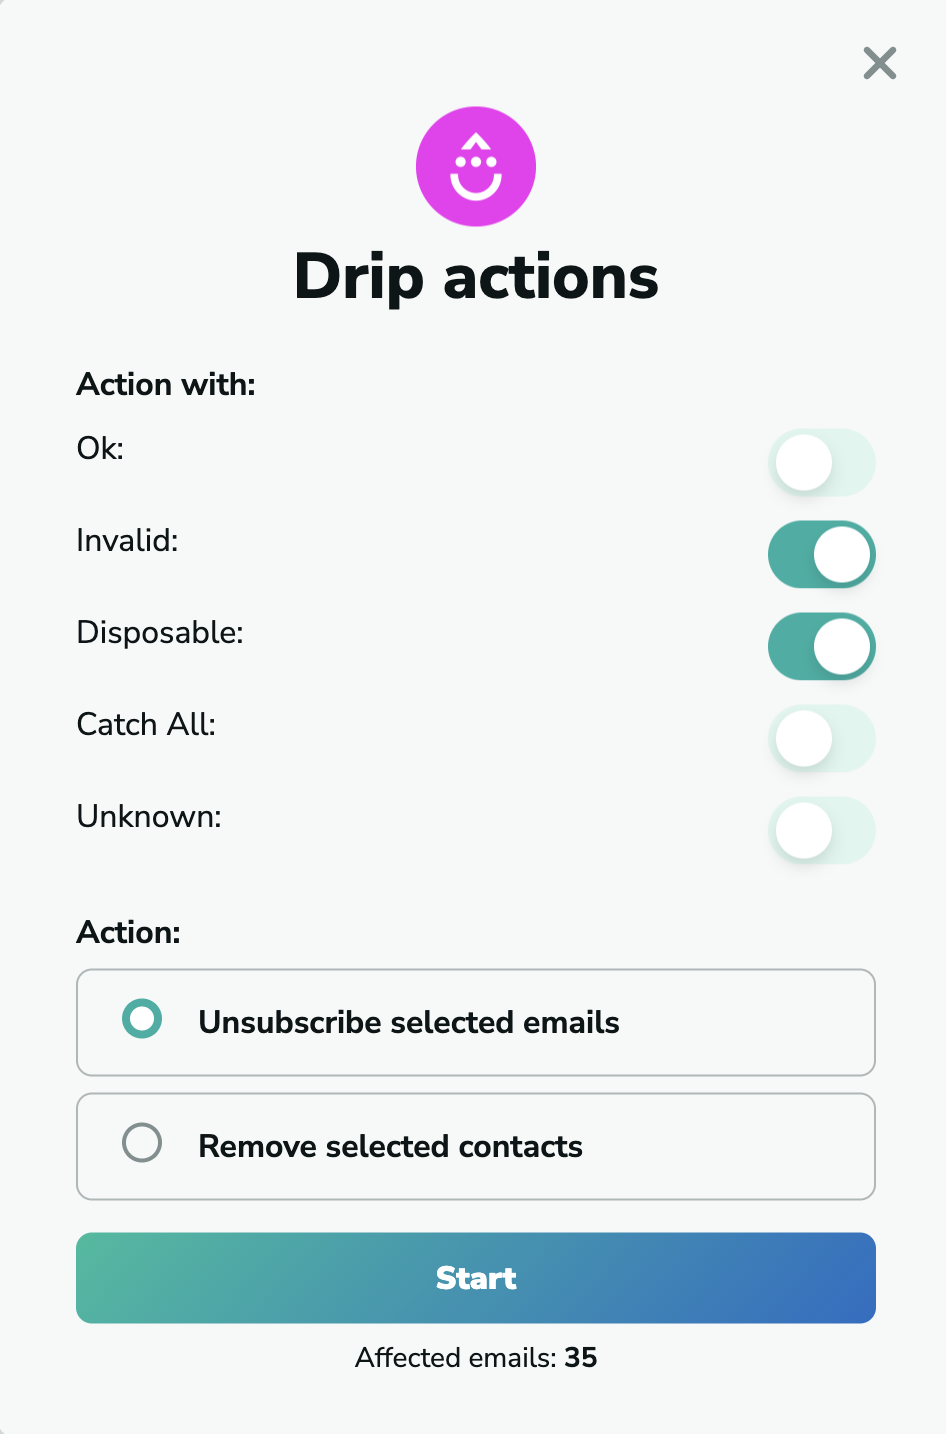 Drip unsubscribe emails in MillionVerifier